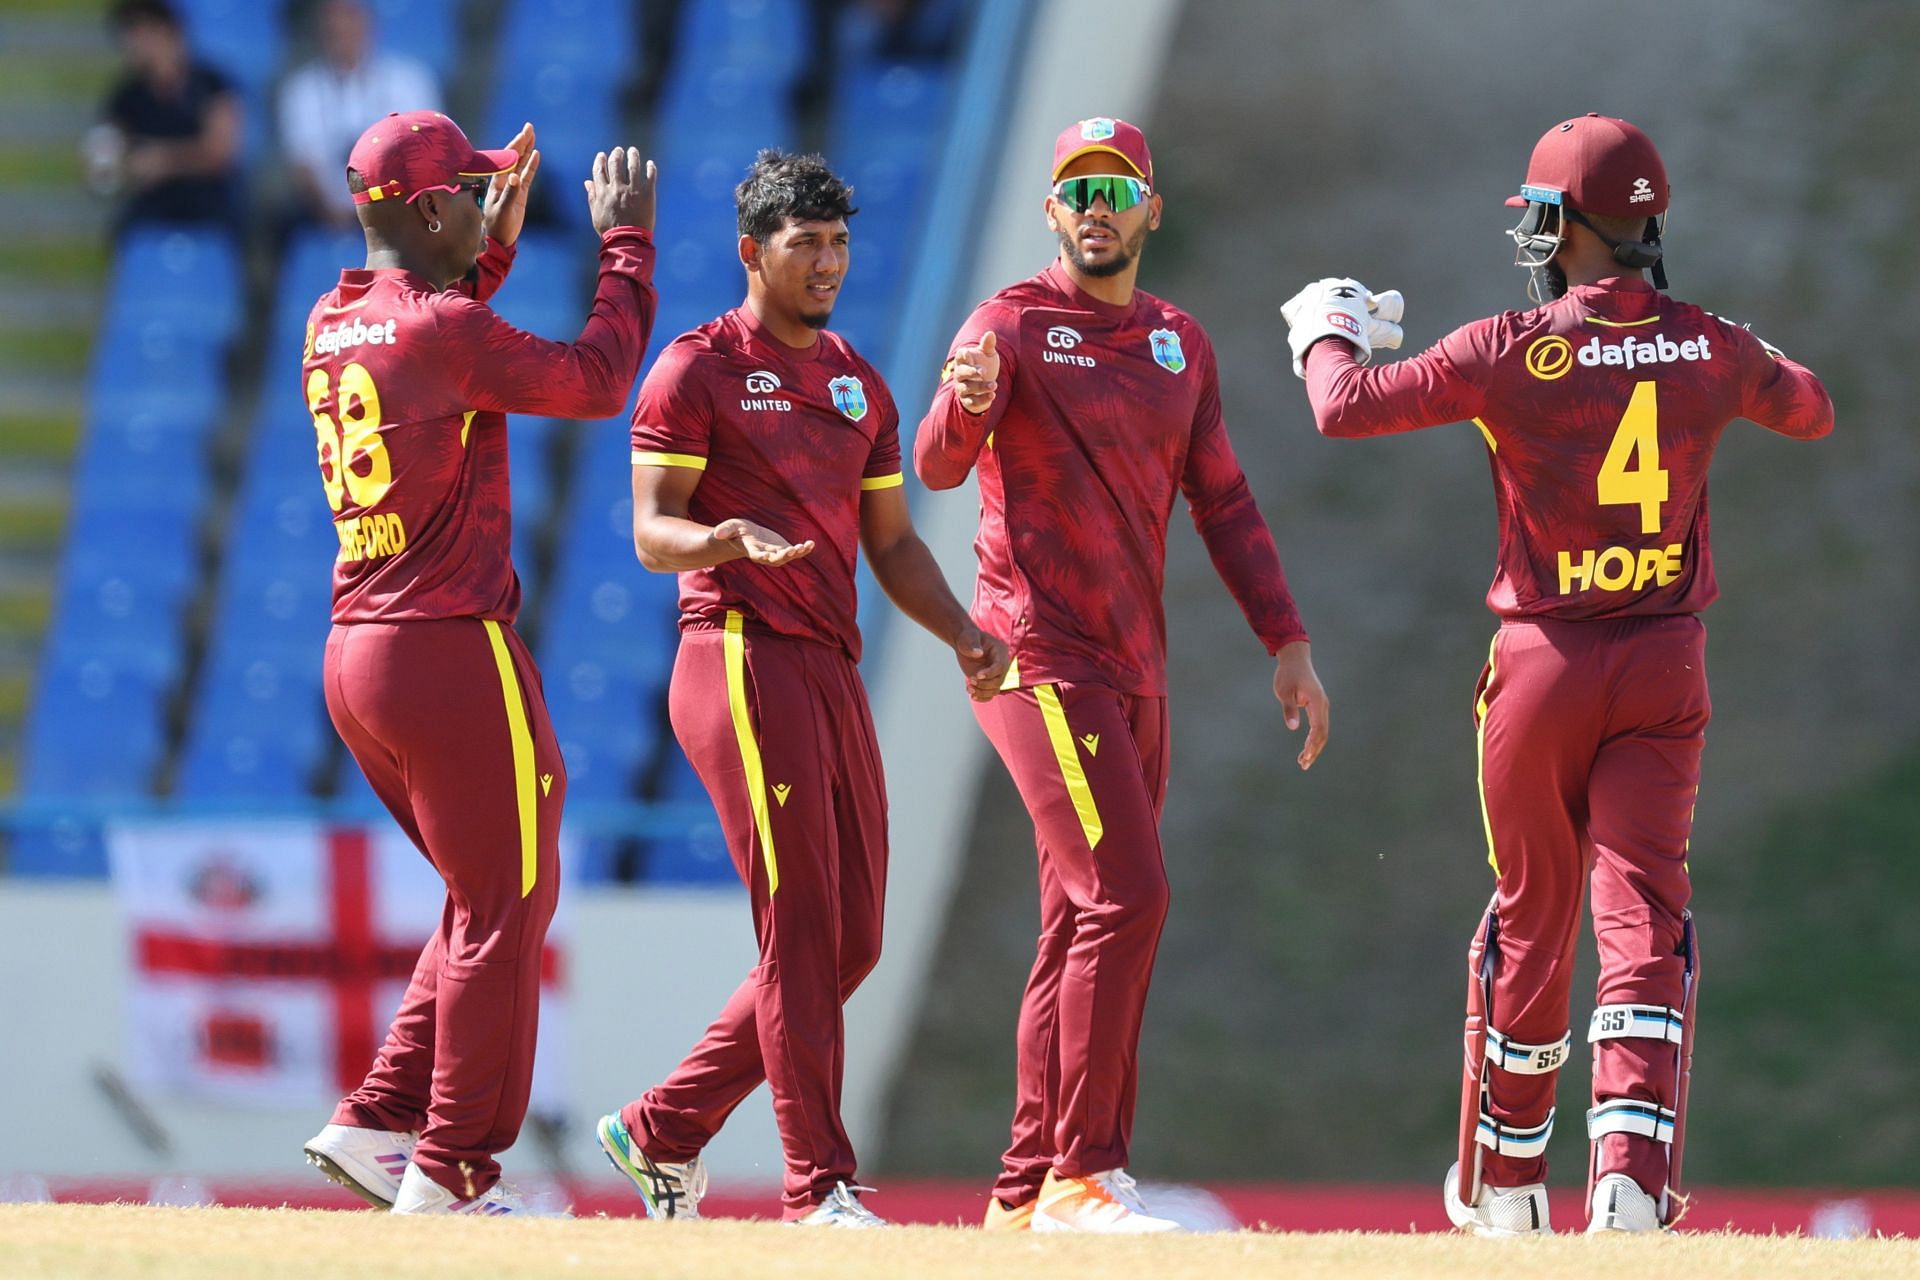 West Indies cricketers in action. (Photo Credits: West Indies Cricket)